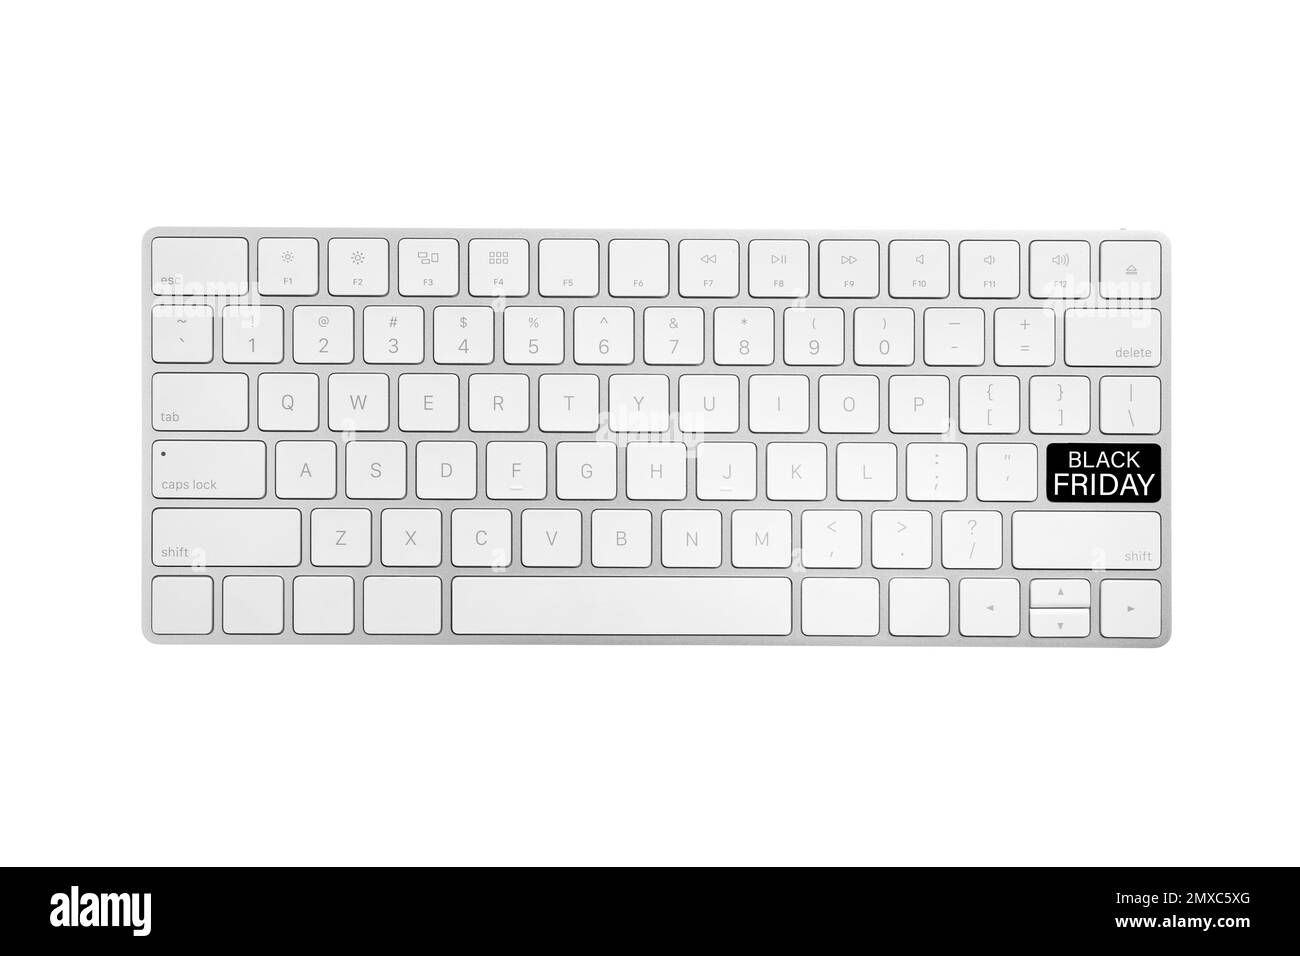 Computer keyboard with Black Friday button, top view. Online shopping Stock Photo